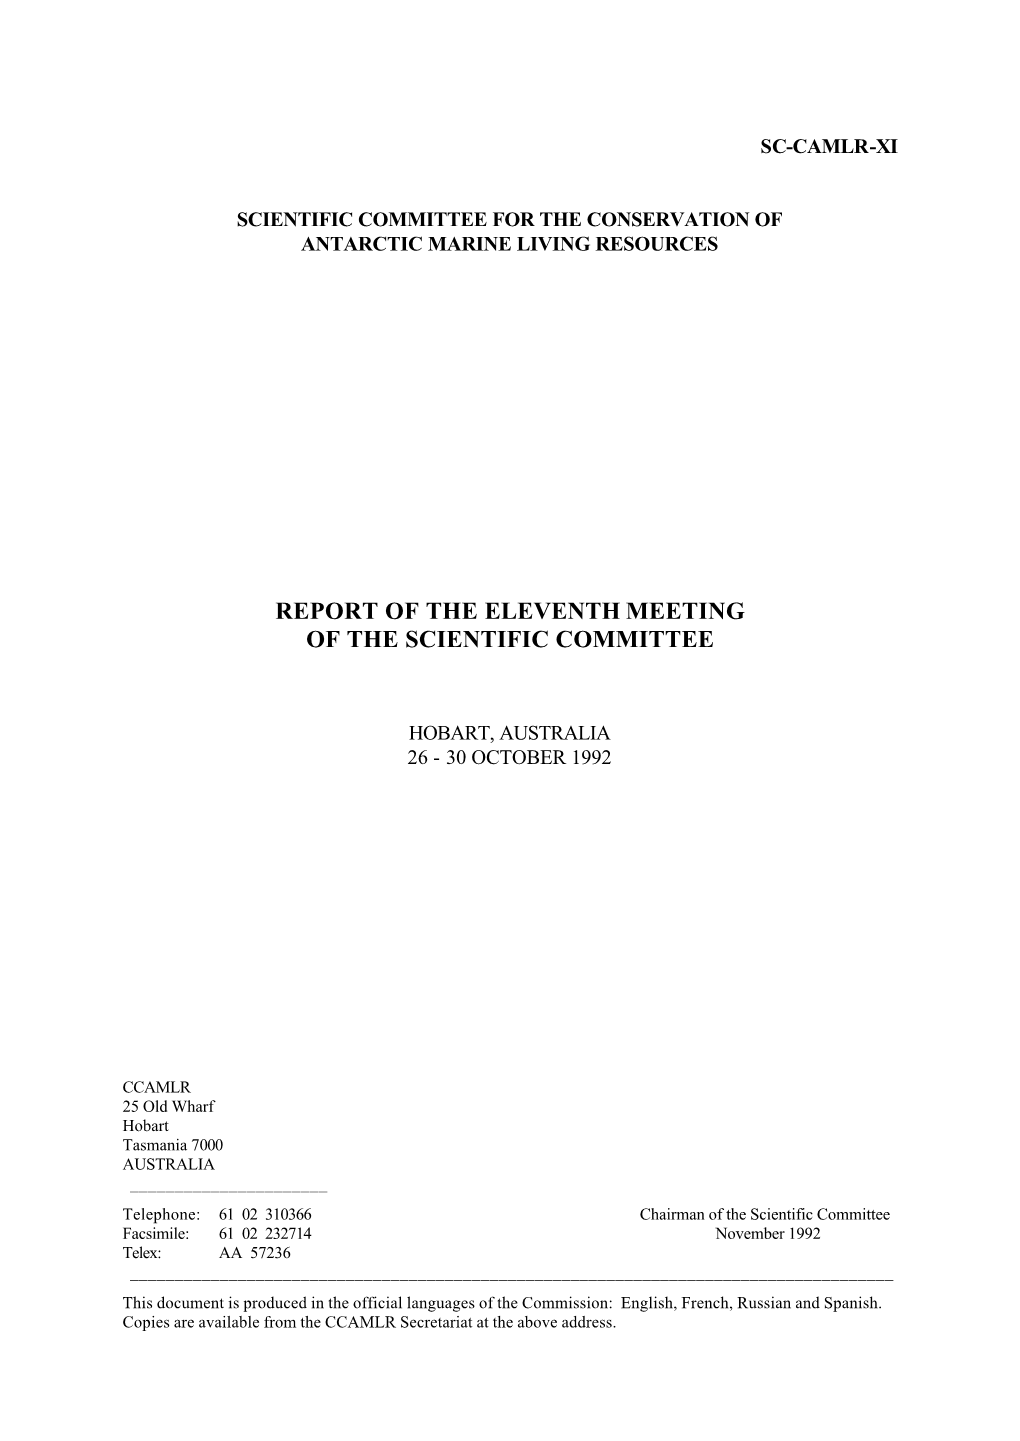 Report of the Eleventh Meeting of the Scientific Committee